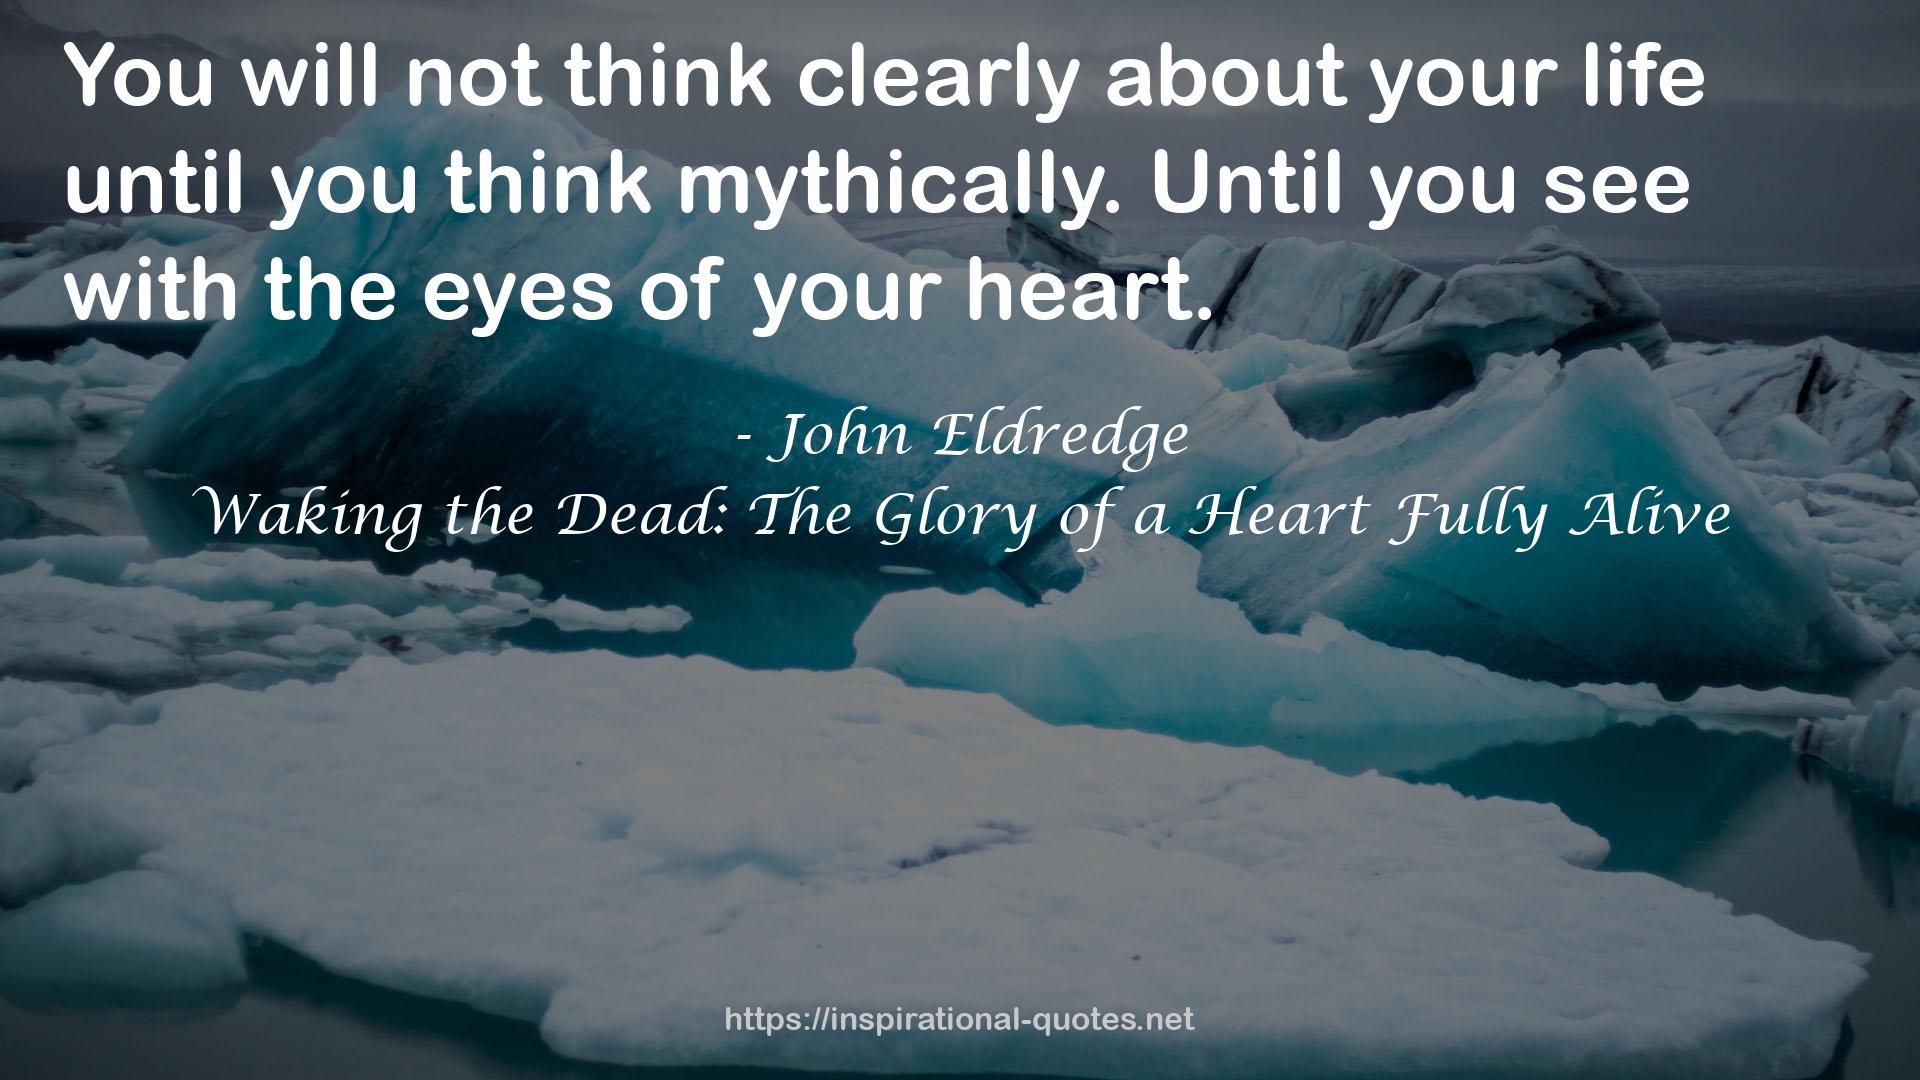 Waking the Dead: The Glory of a Heart Fully Alive QUOTES